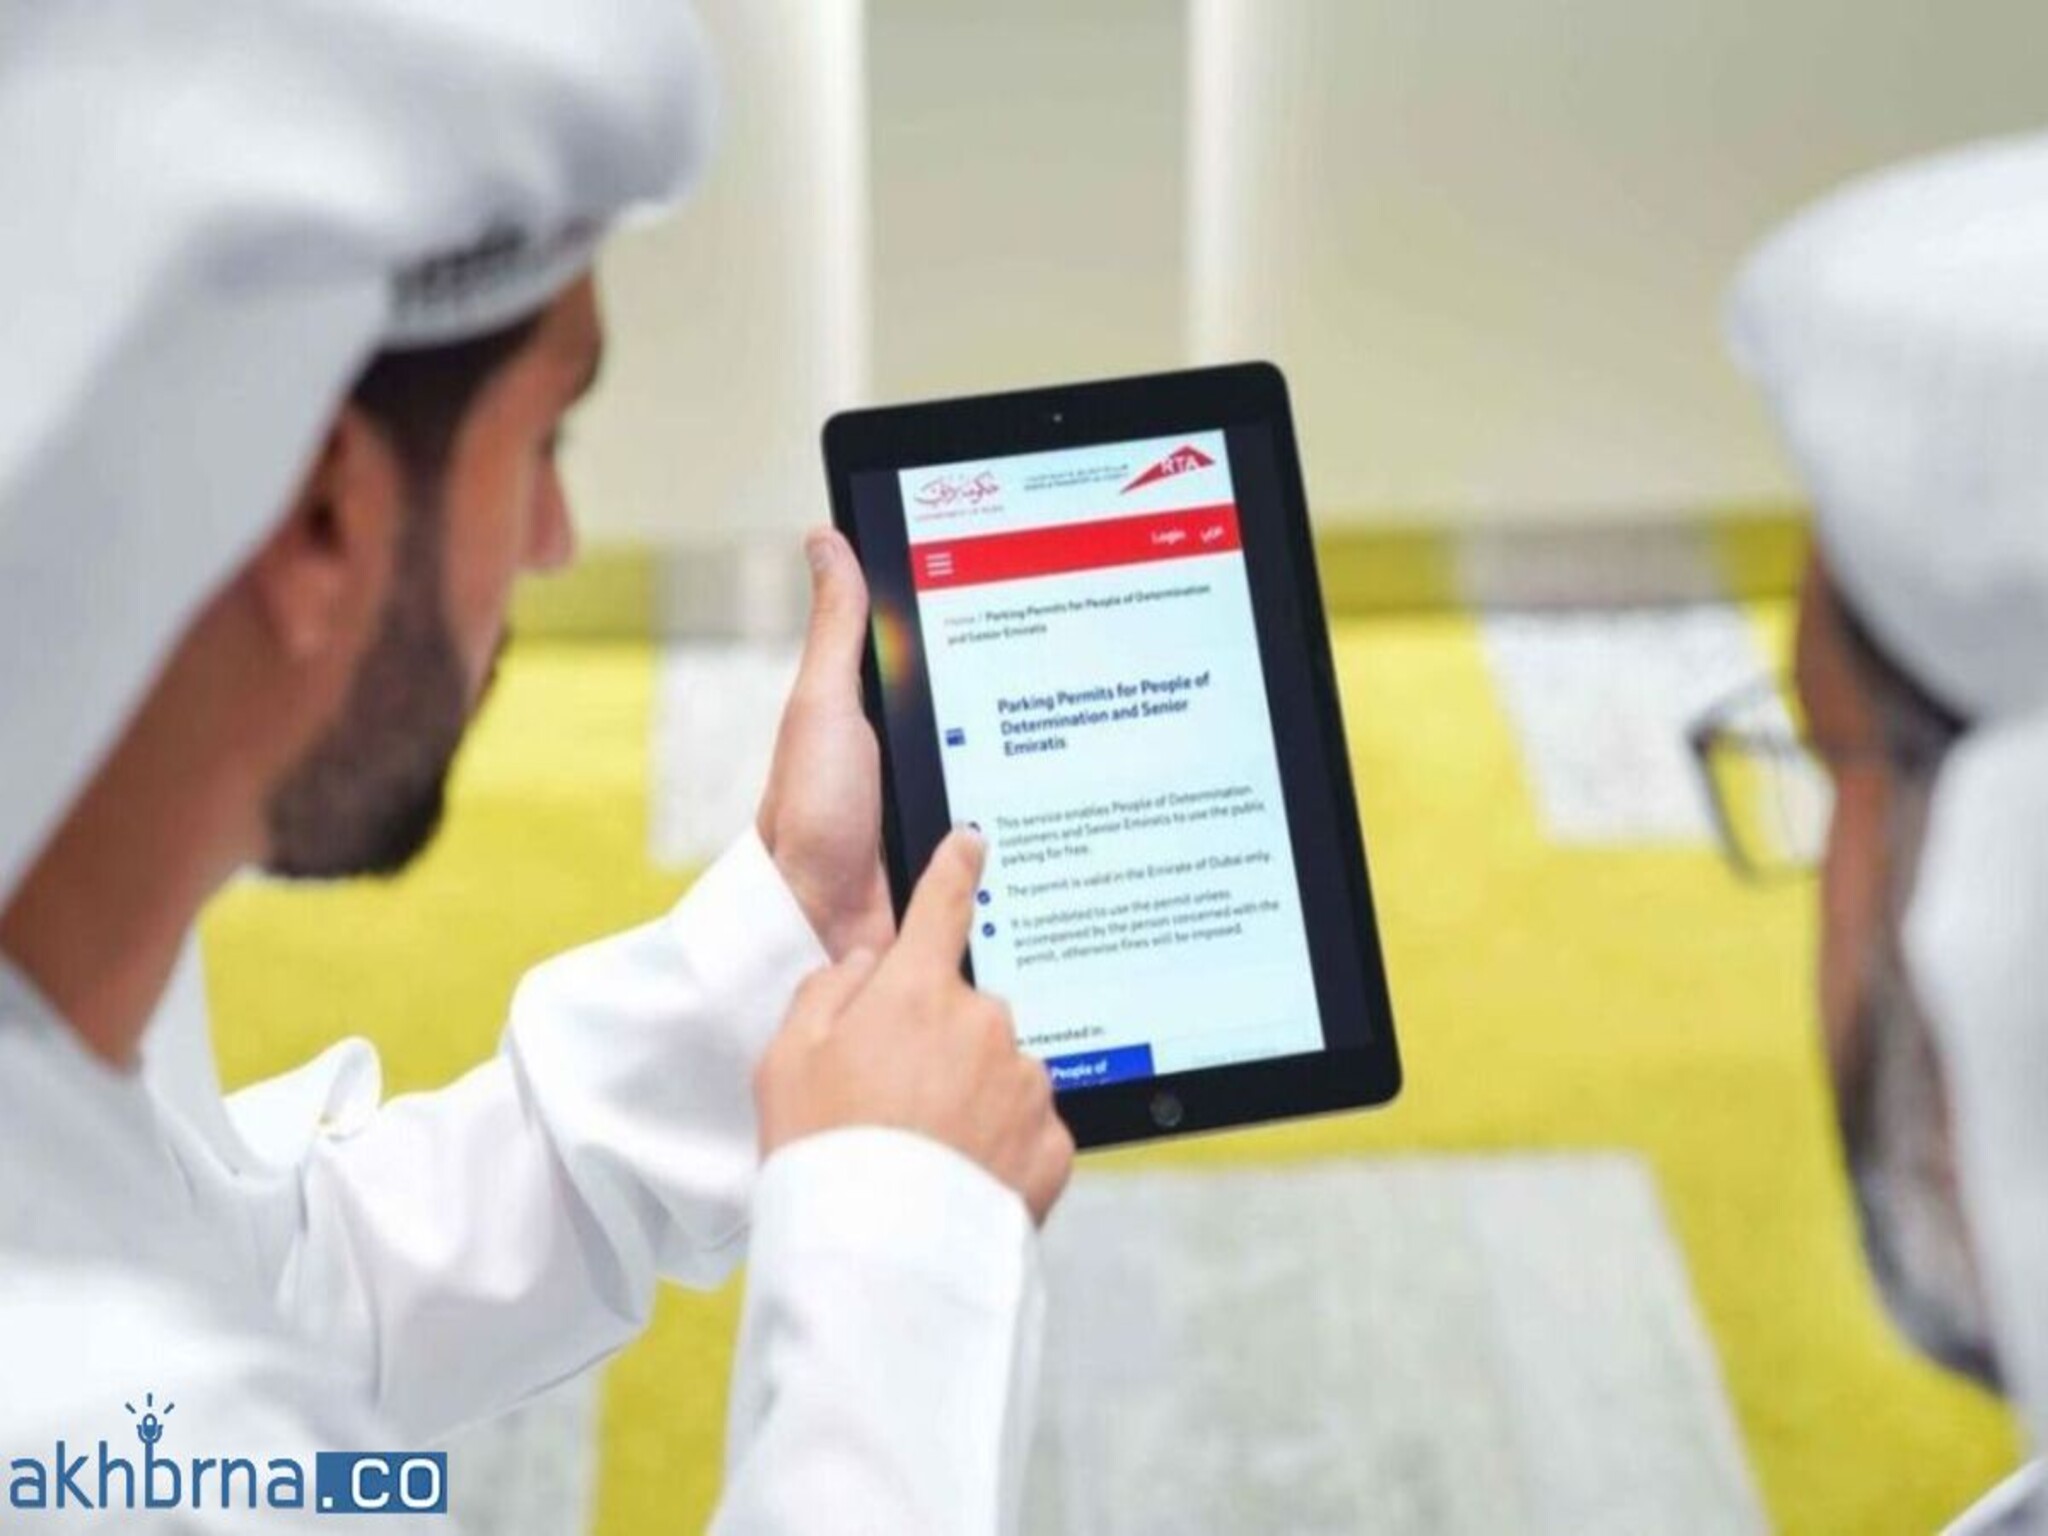 Dubai Launches New RTA App Update to Renew Licenses, Pay Parking Faster